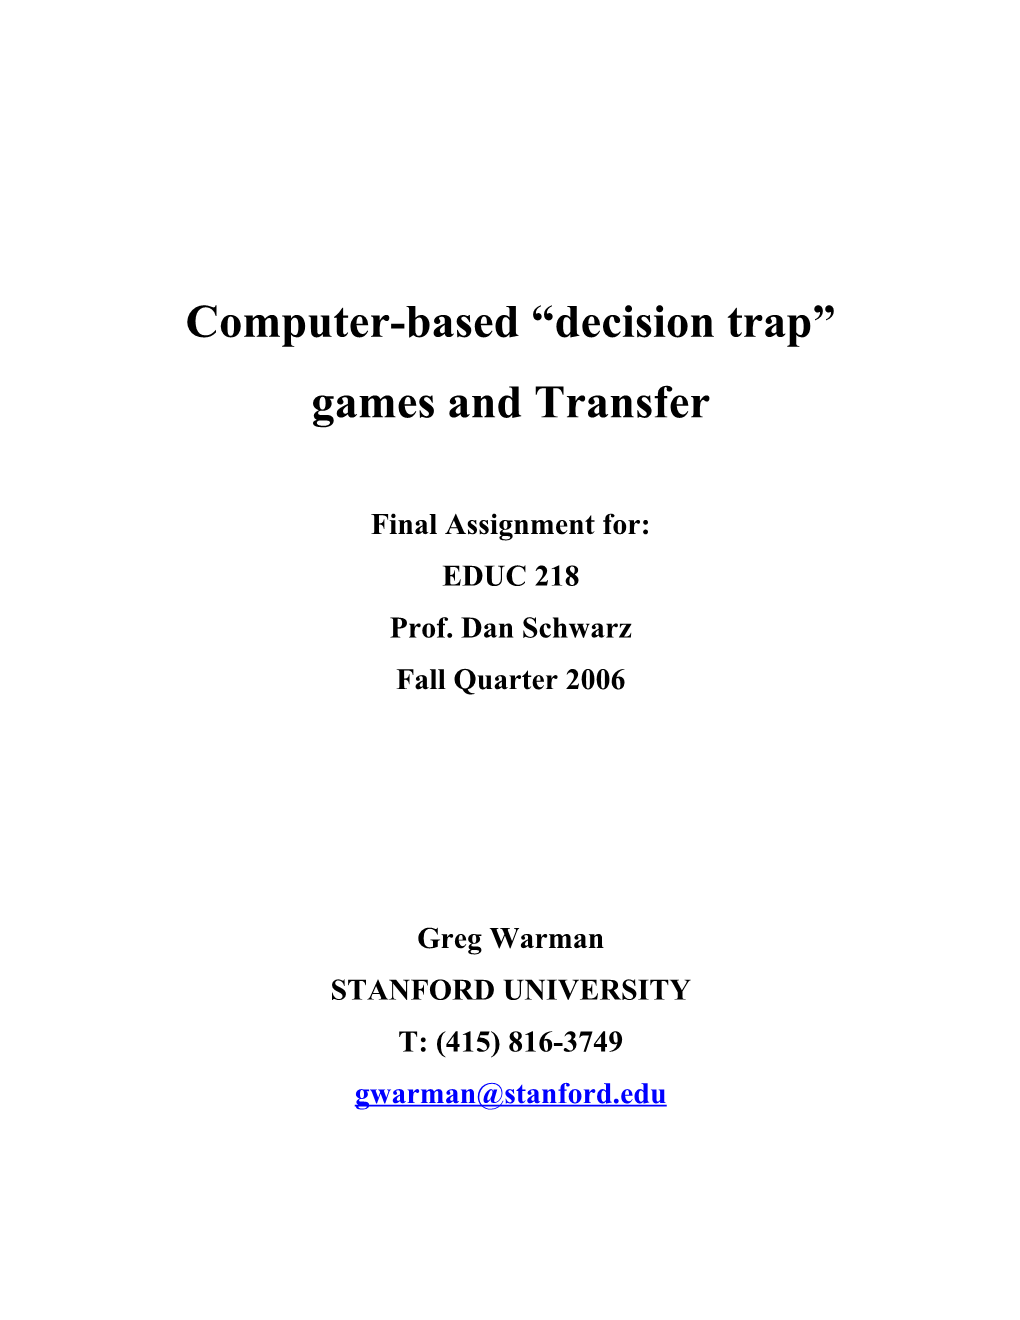 Computer-Based Decision Trap Games and Transfer